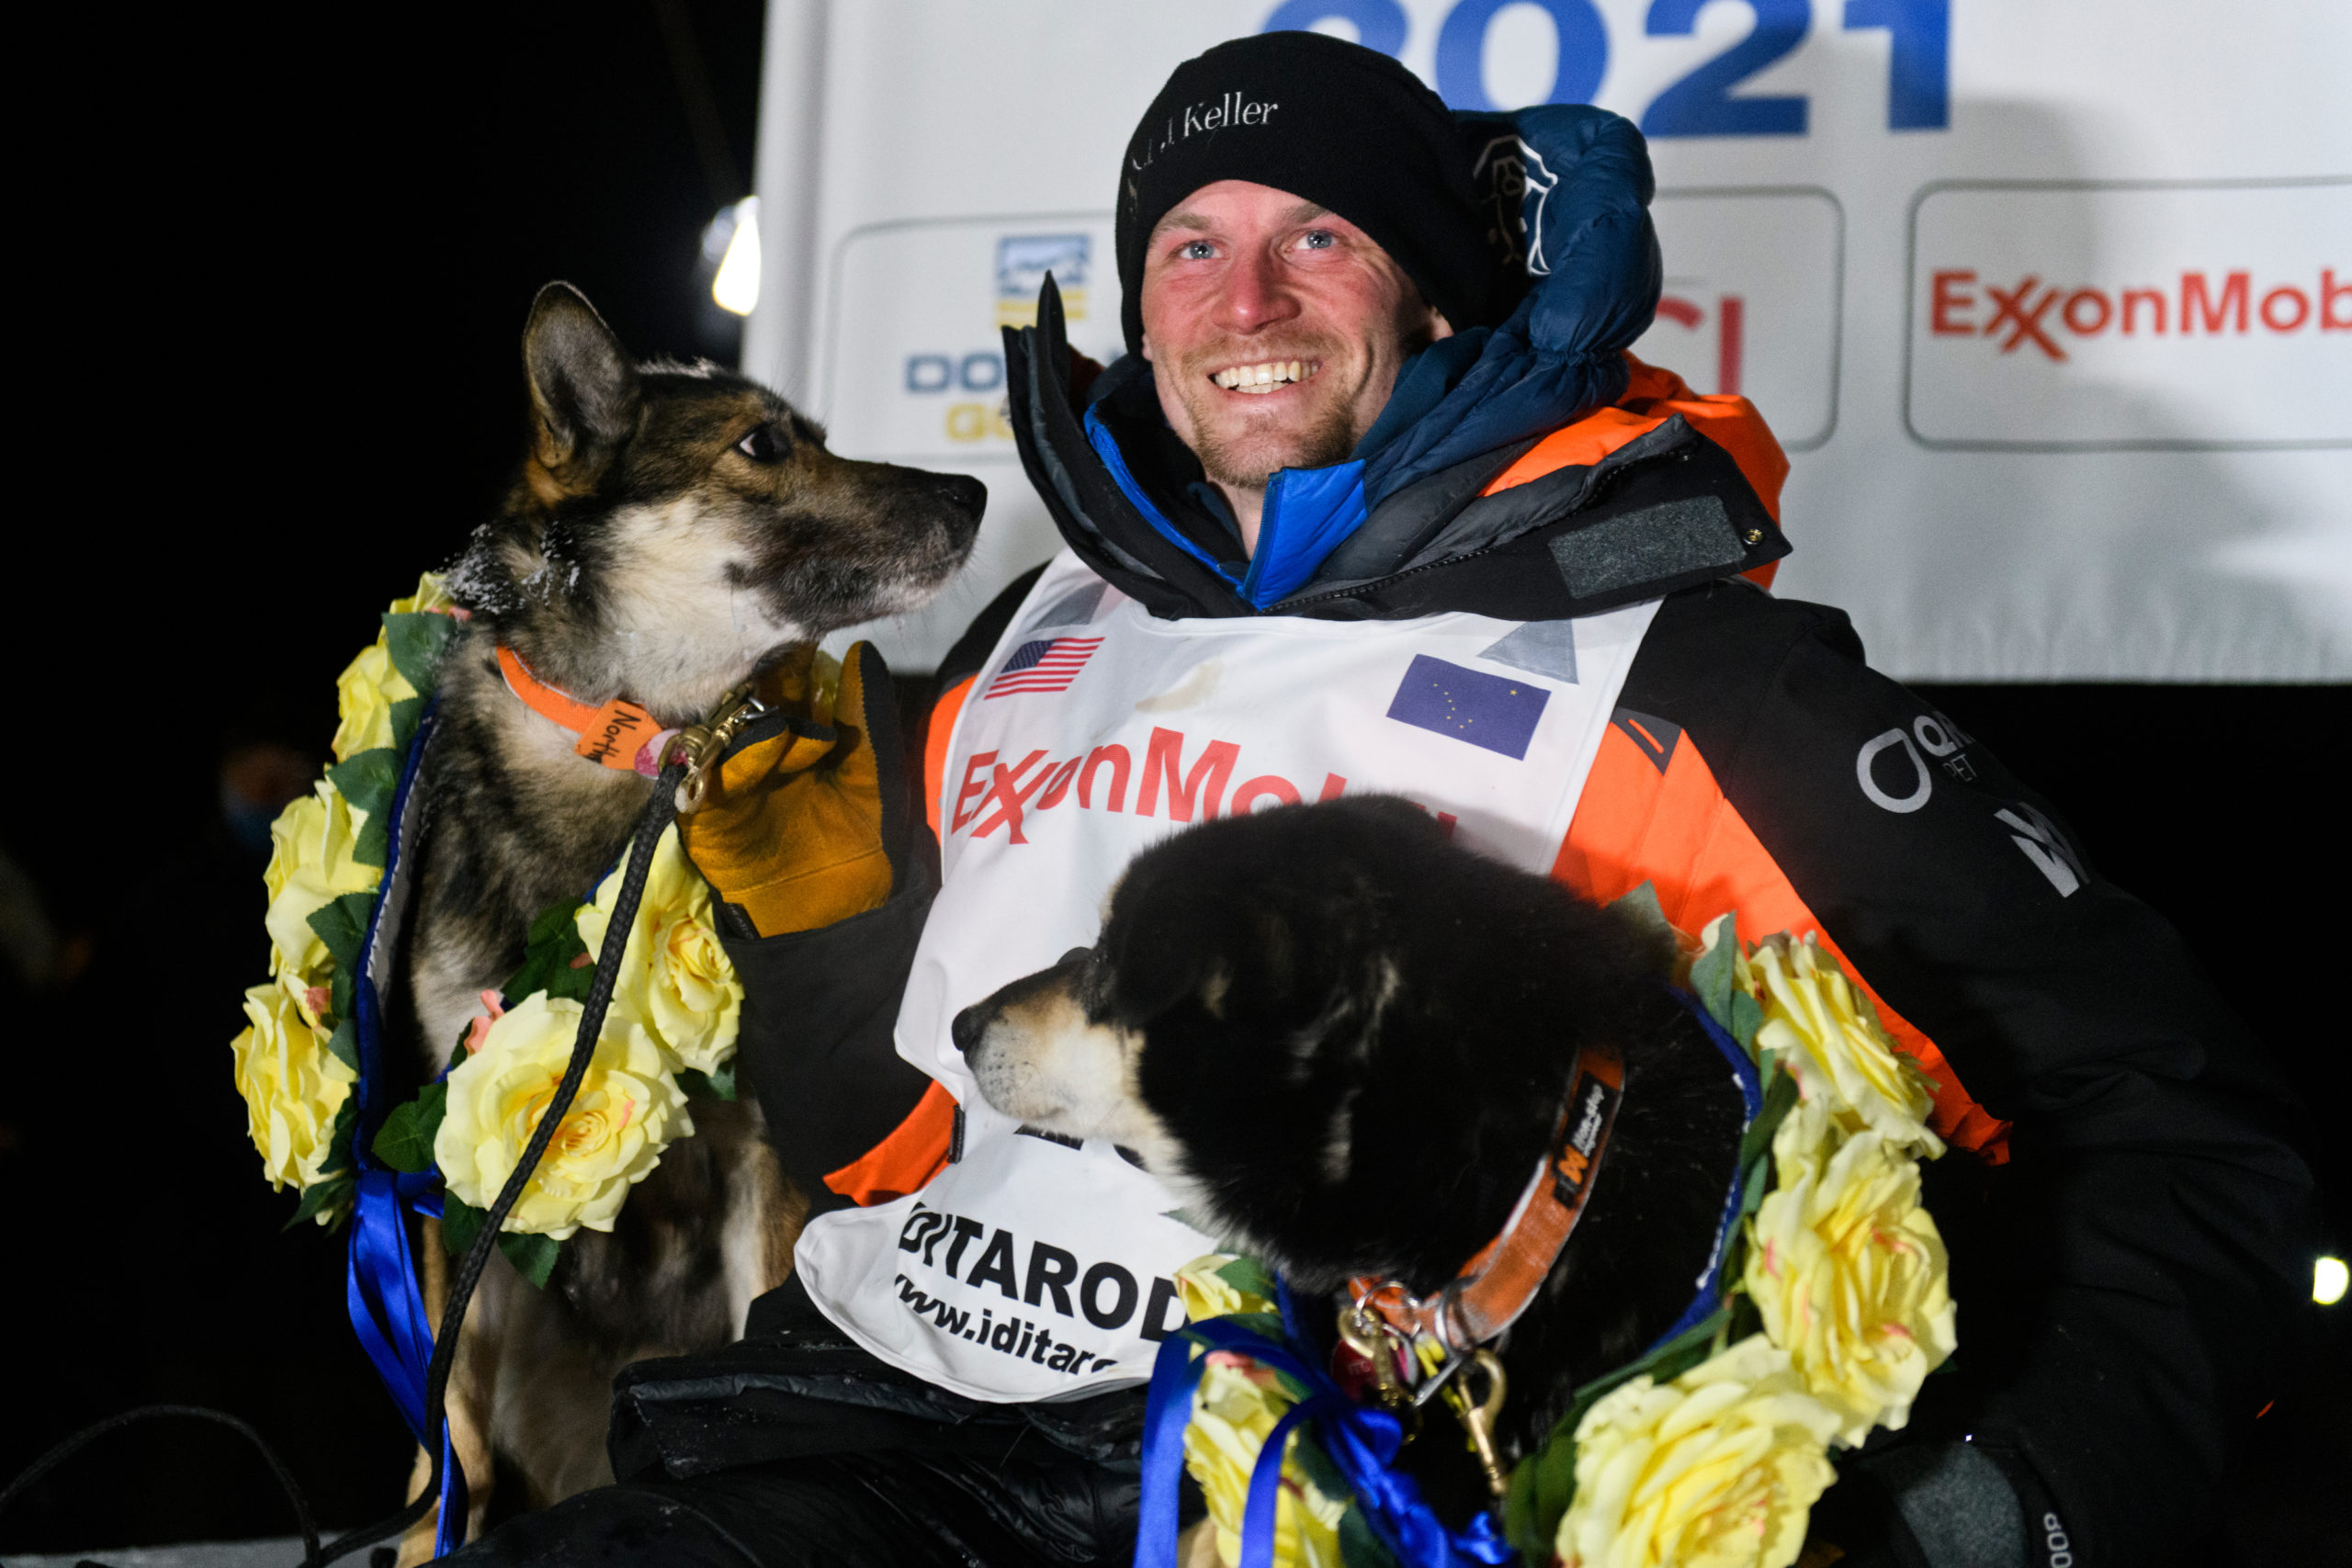 I&#39;ve dreamed about this my whole life&#39;: Dallas Seavey wins record-tying 5th Iditarod - Alaska Public Media